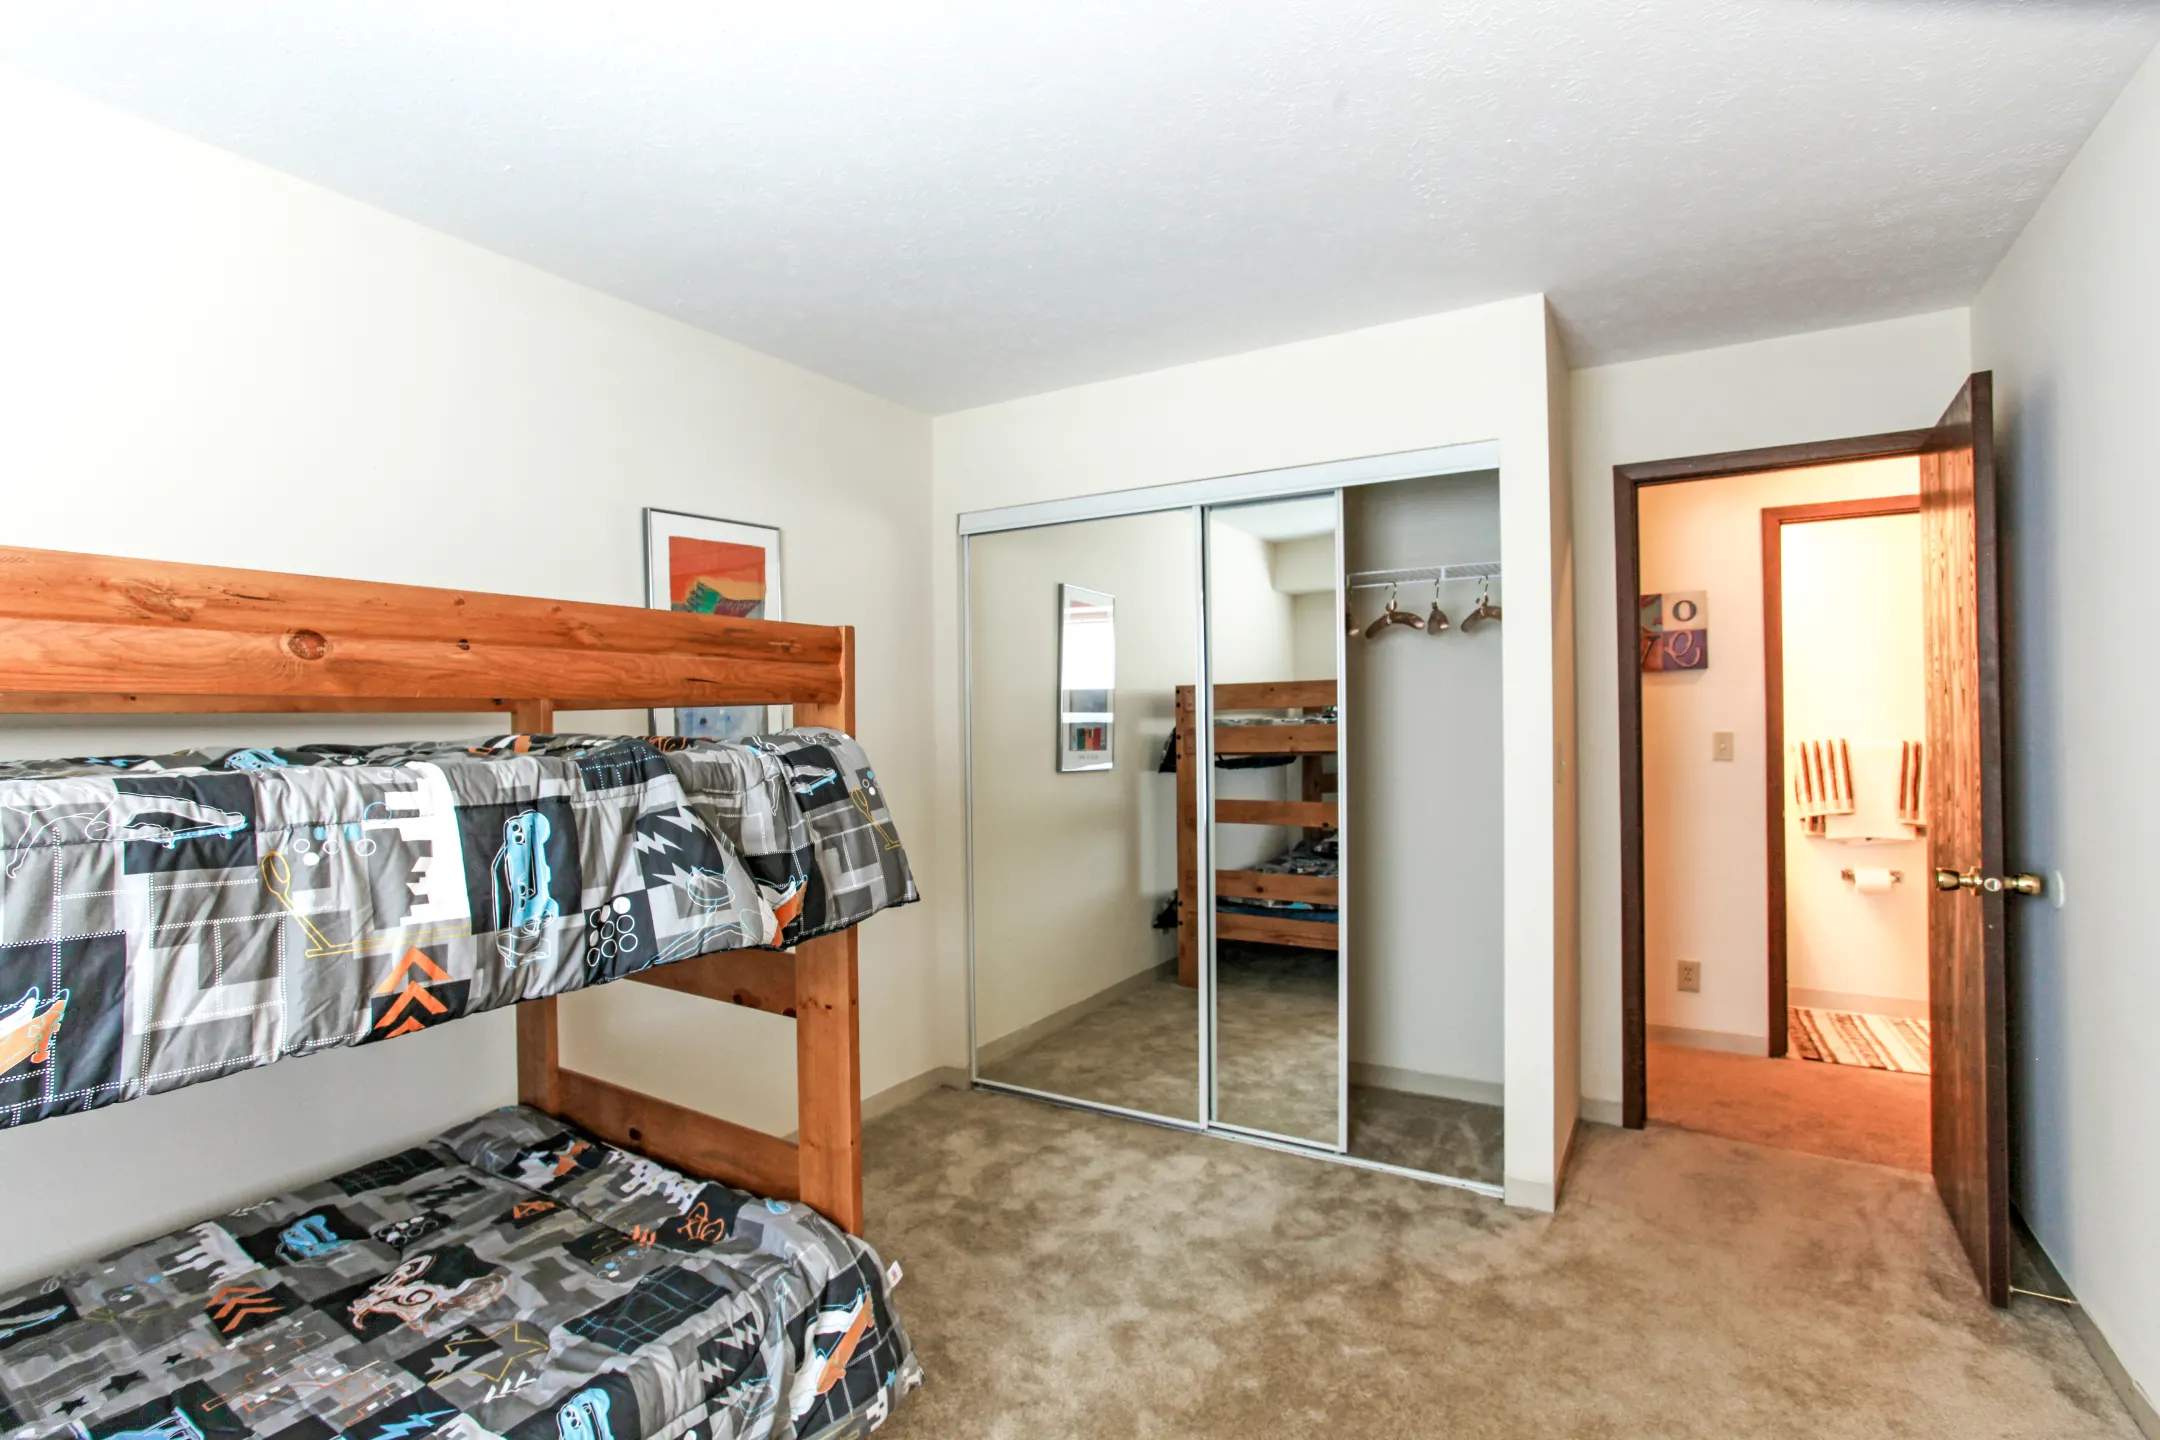 Bedroom - Bay Club Apartments - Willowick, OH